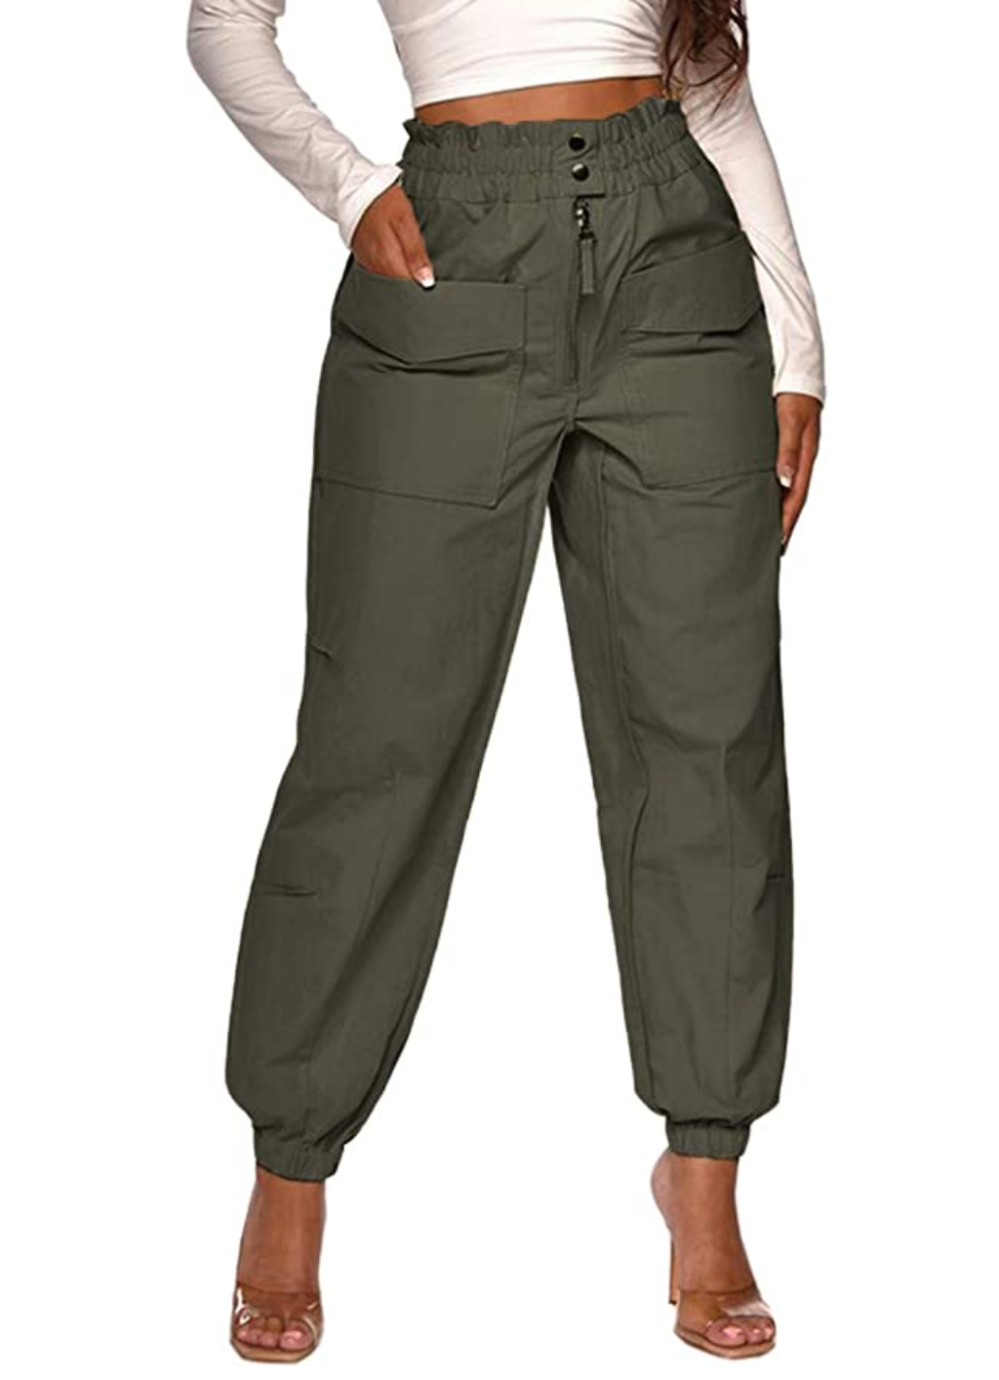 Women's Cargo Pants guide and information resource about Women's Cargo  Pants : Clothing, Style and Fashion Style Directory by Apparel Search